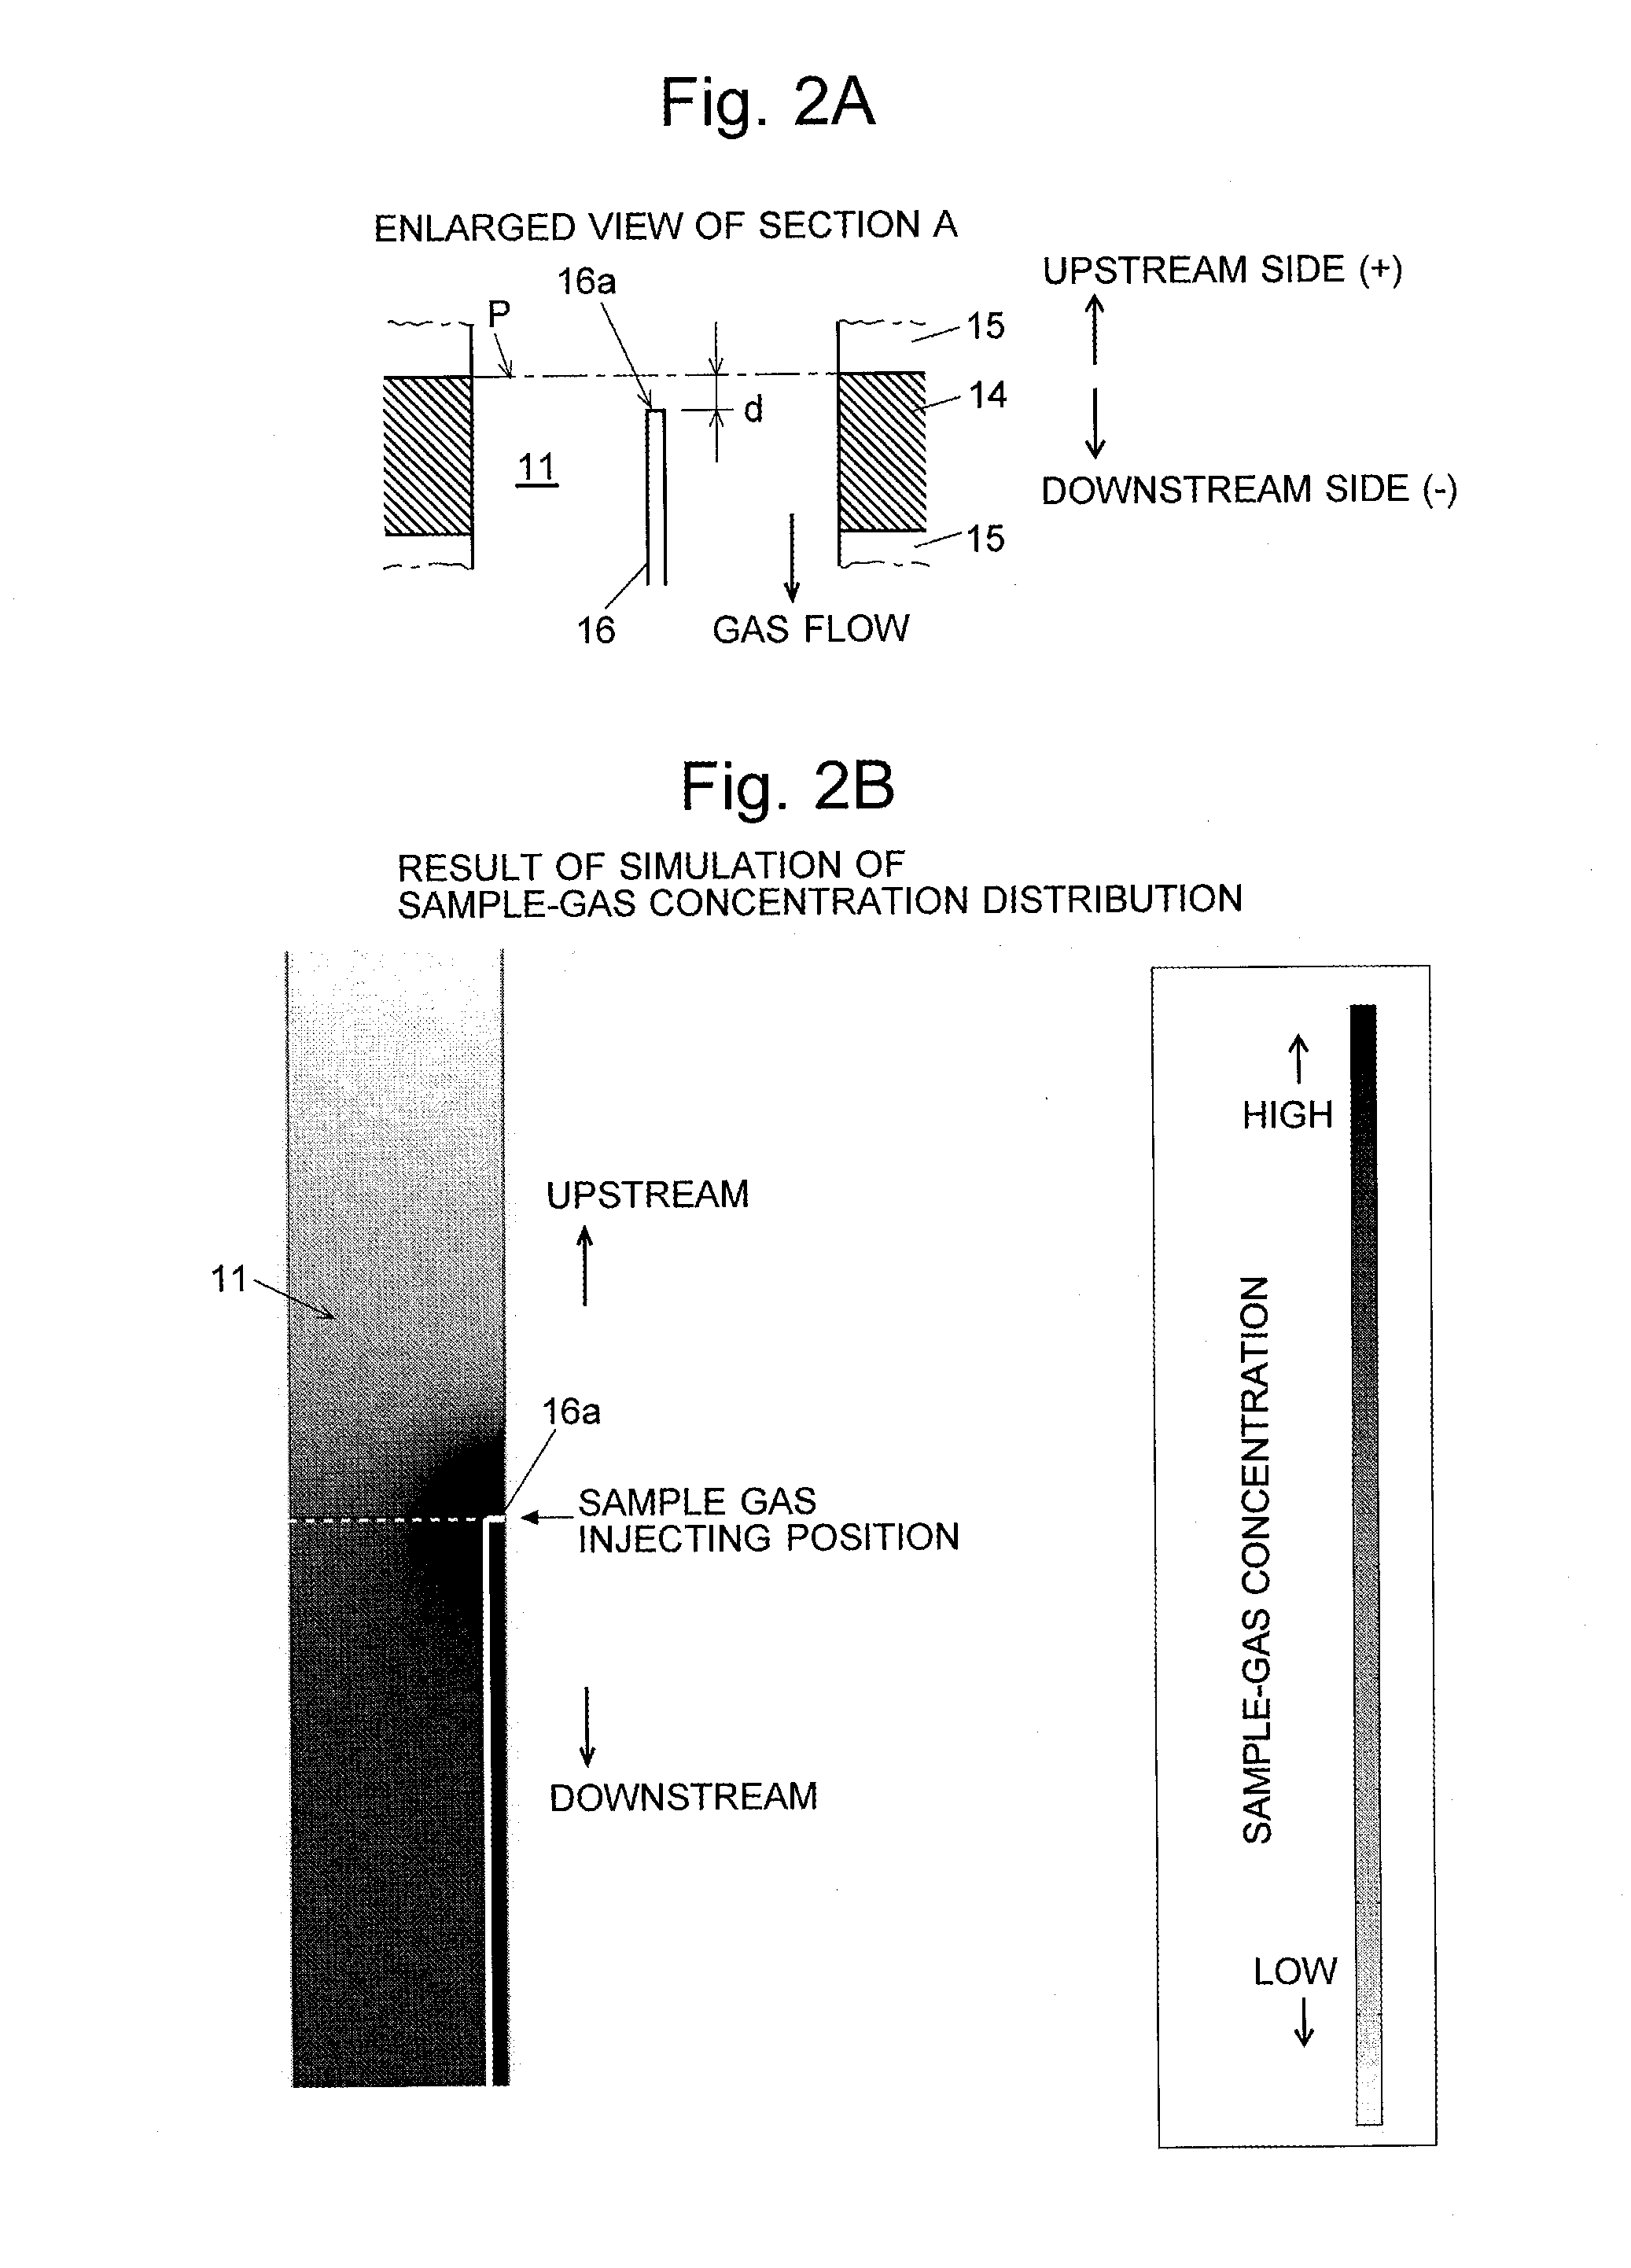 Dielectric barrier discharge ionization detector and method for tuning the same